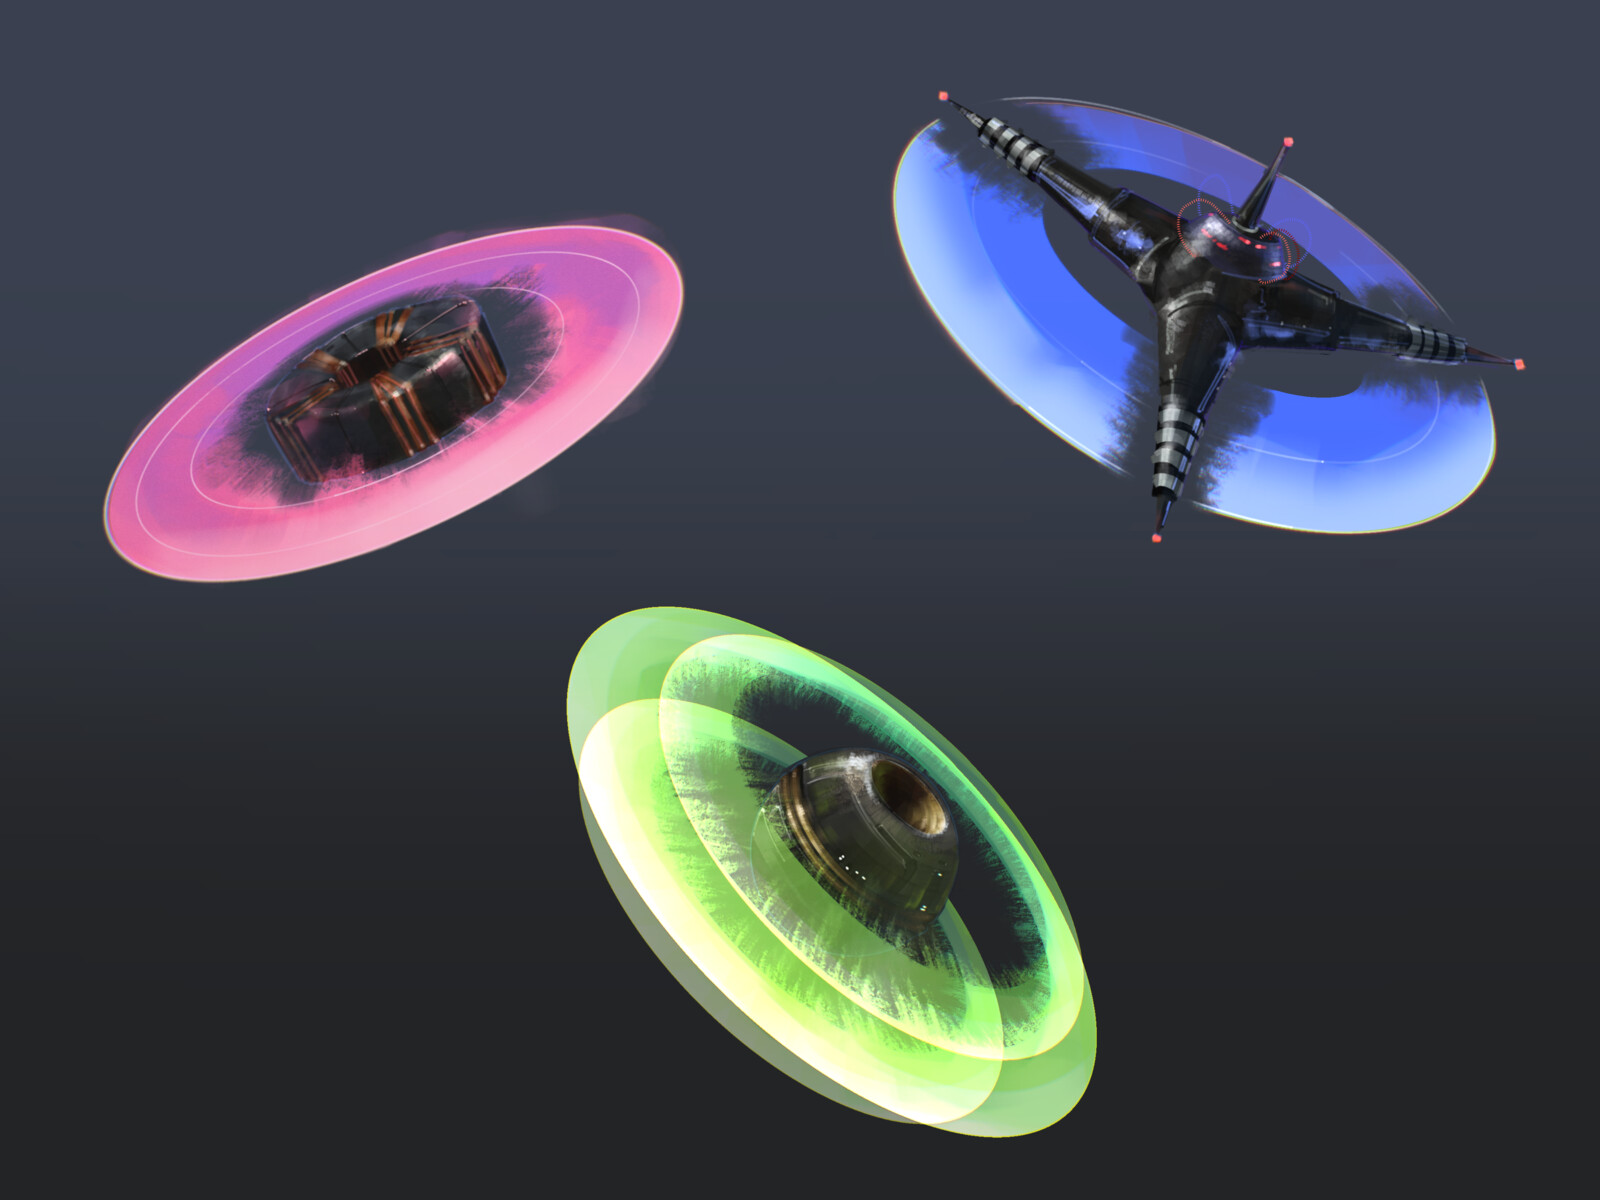 Light Discs: Base Disc, Scatter Disc, and Needle Disc (left to right).